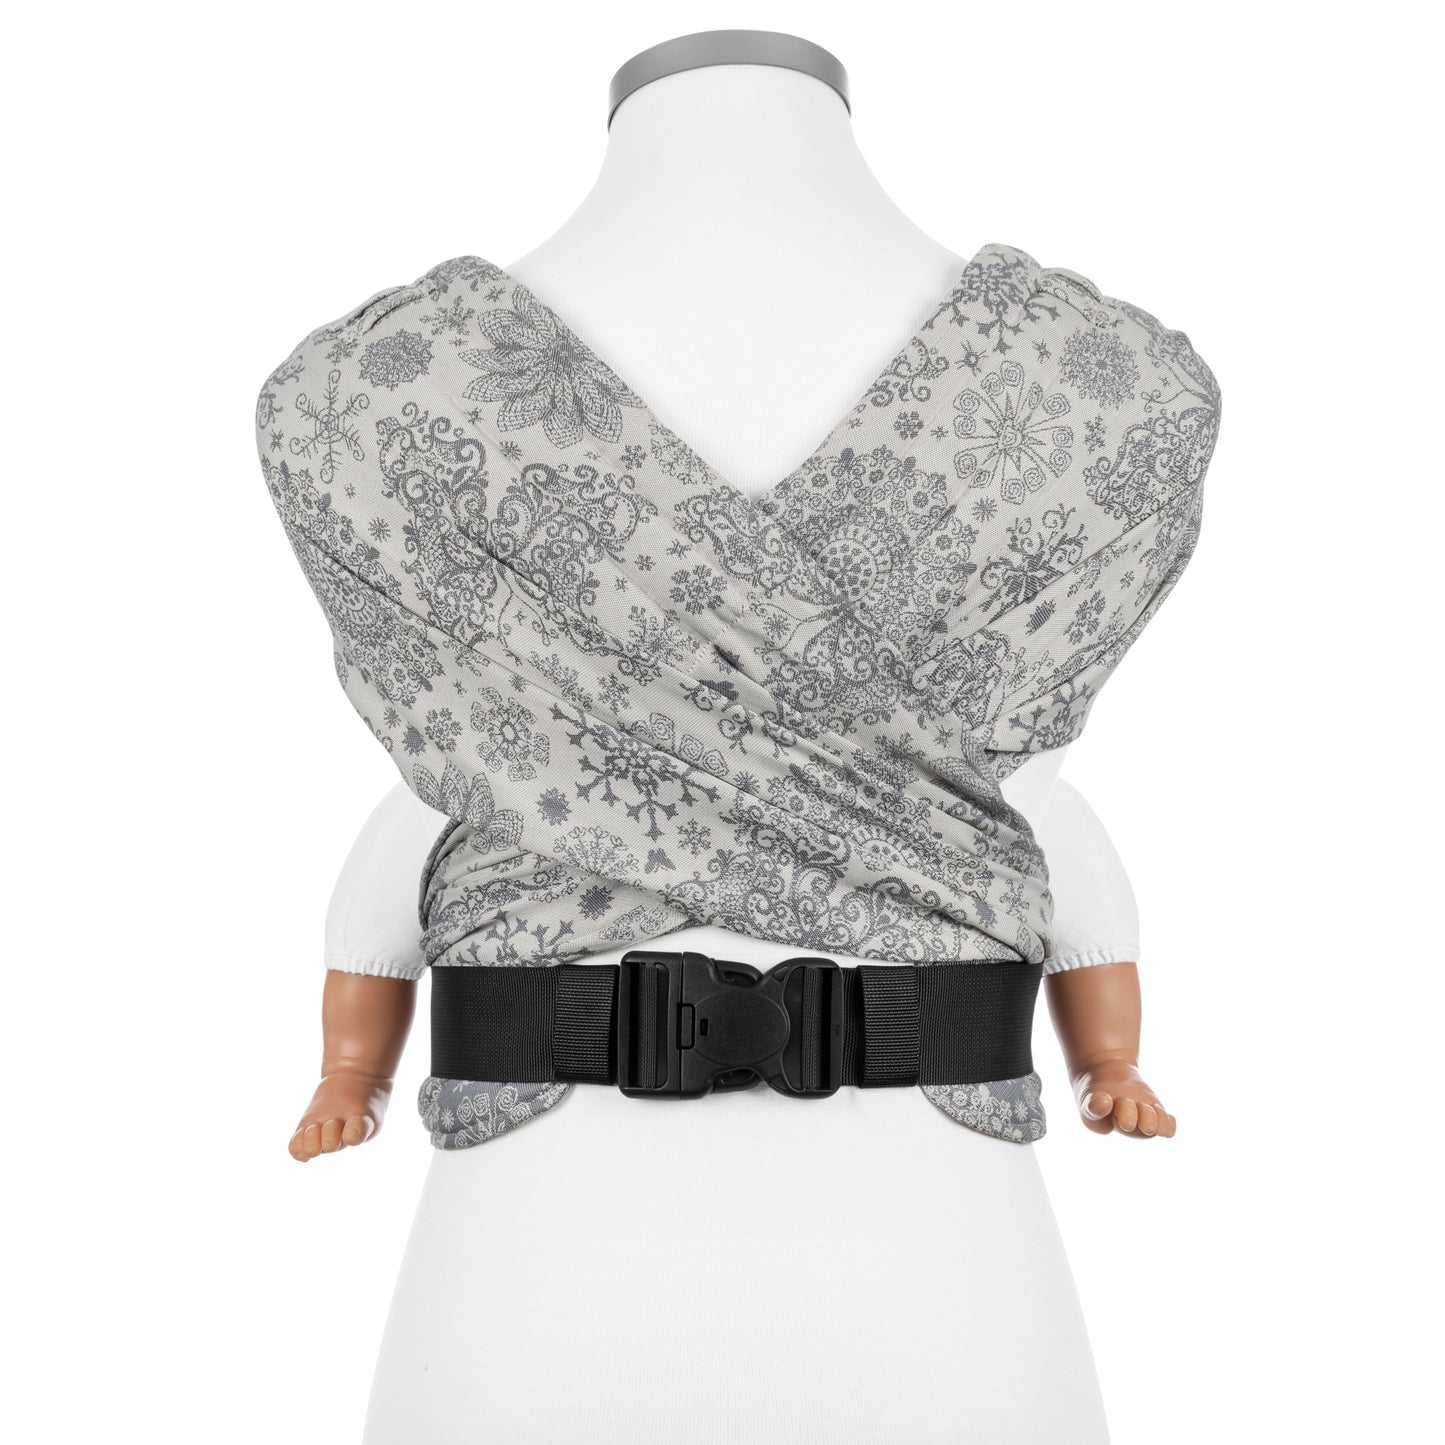 FlyClick - Halfbuckle Baby Carrier - Iced Butterfly - smoke